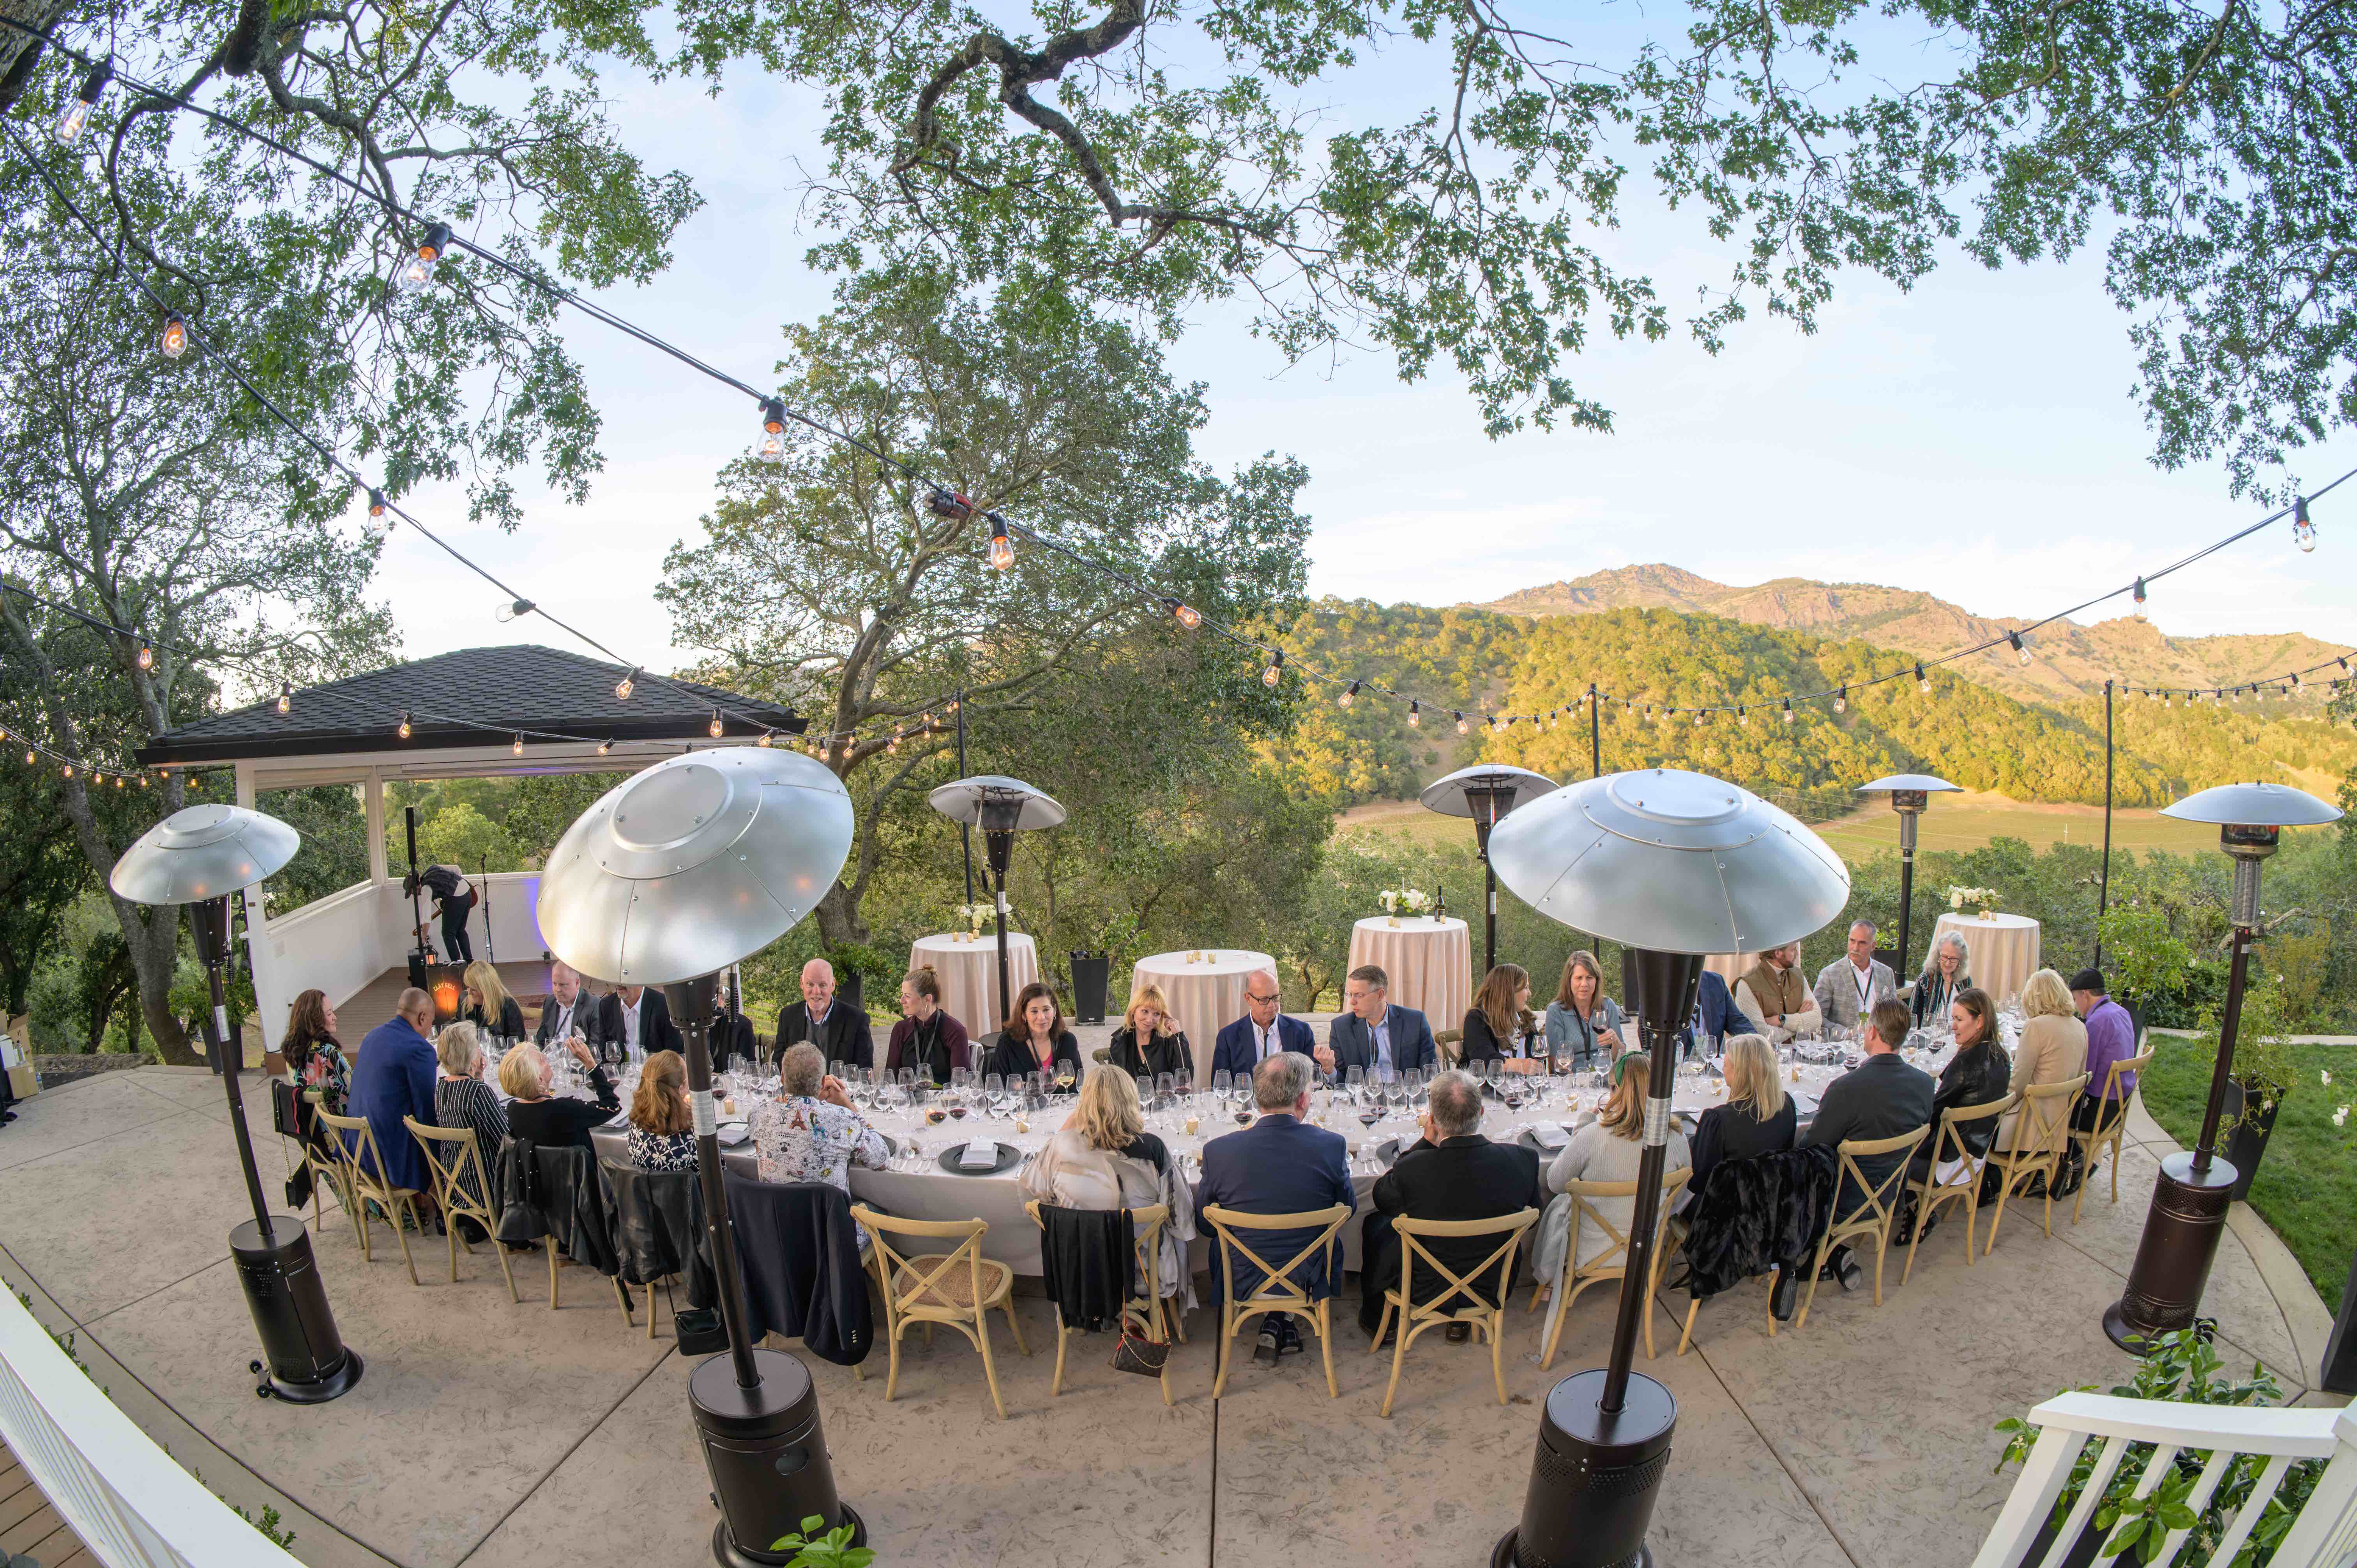 This event will bring wine enthusiasts and collectors together with vintners, winemakers, and principals for an exclusive weekend of limited wines, fine dining, and immersive experiences.